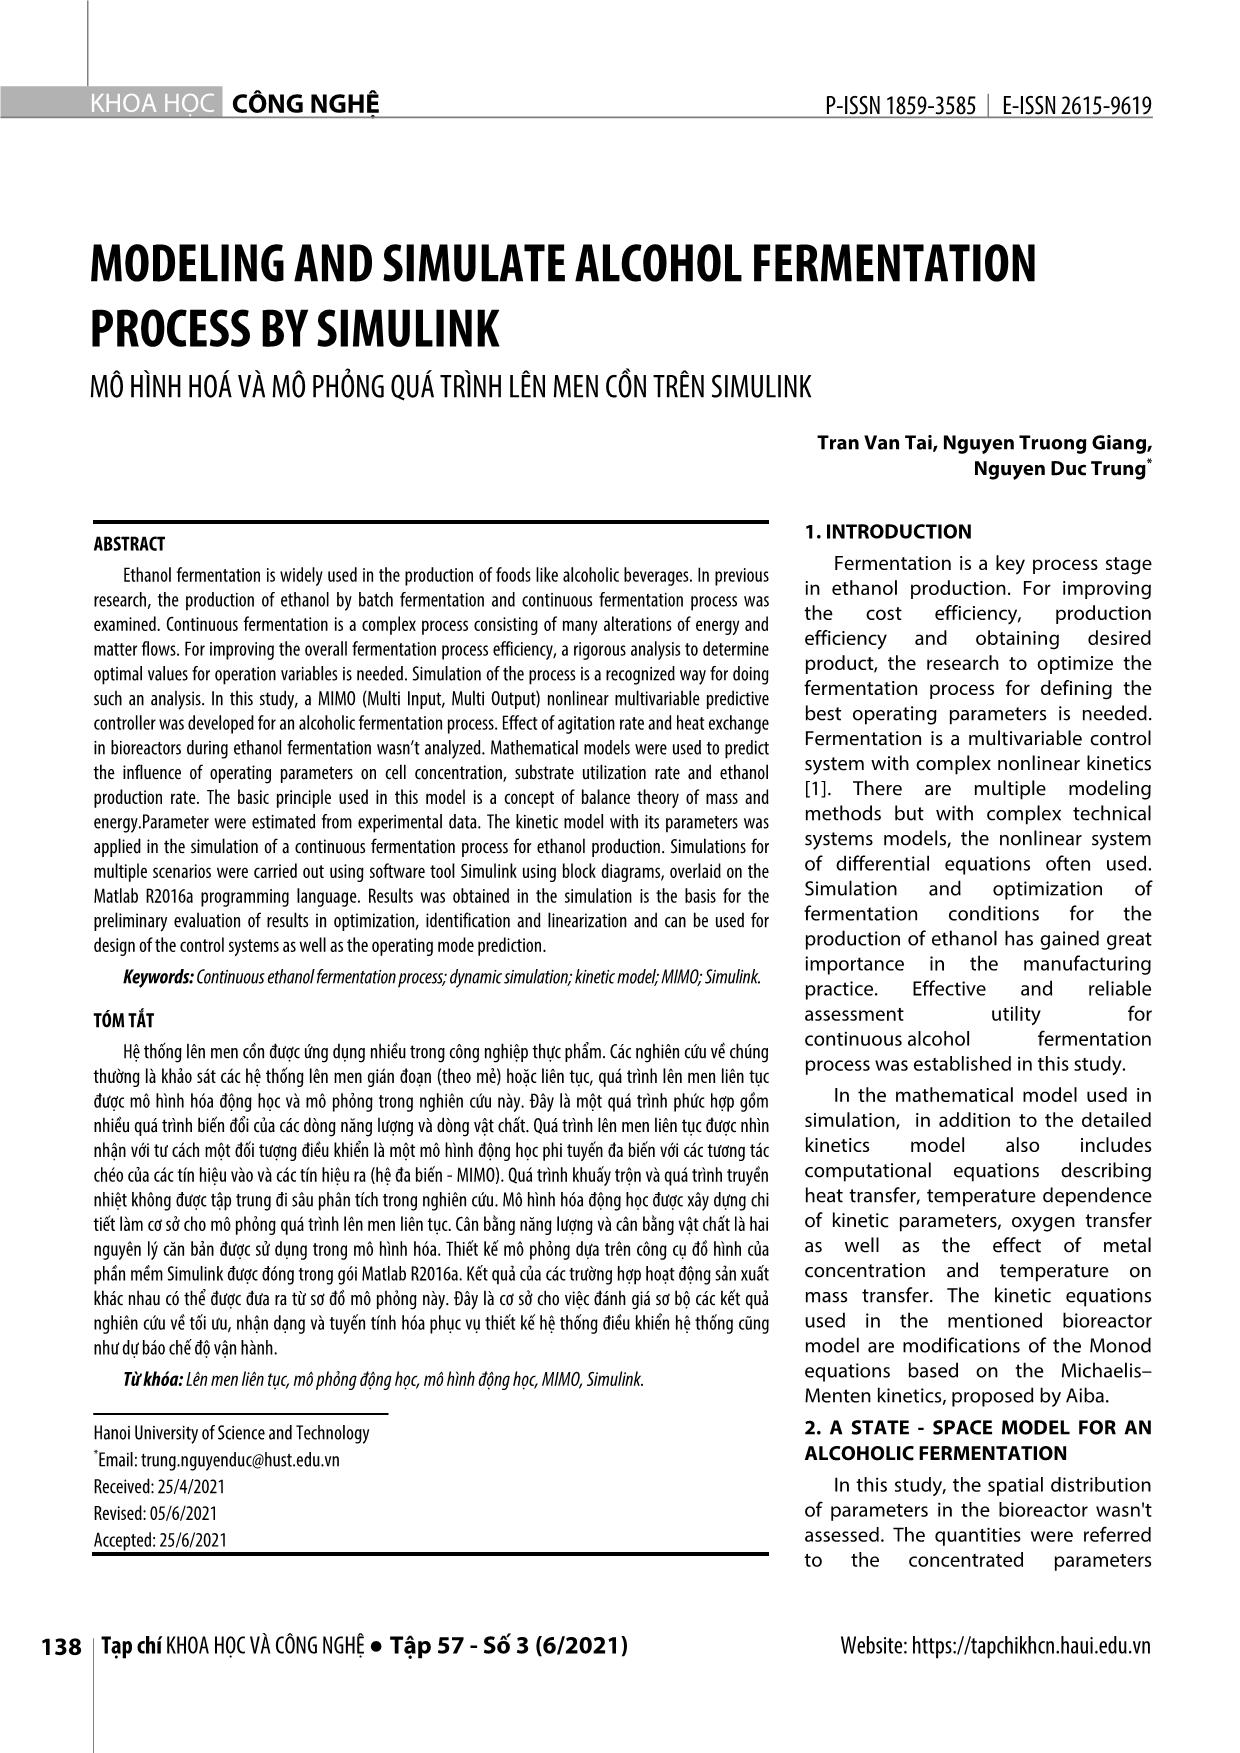 Modeling and simulate alcohol fermentation process by simulink trang 1